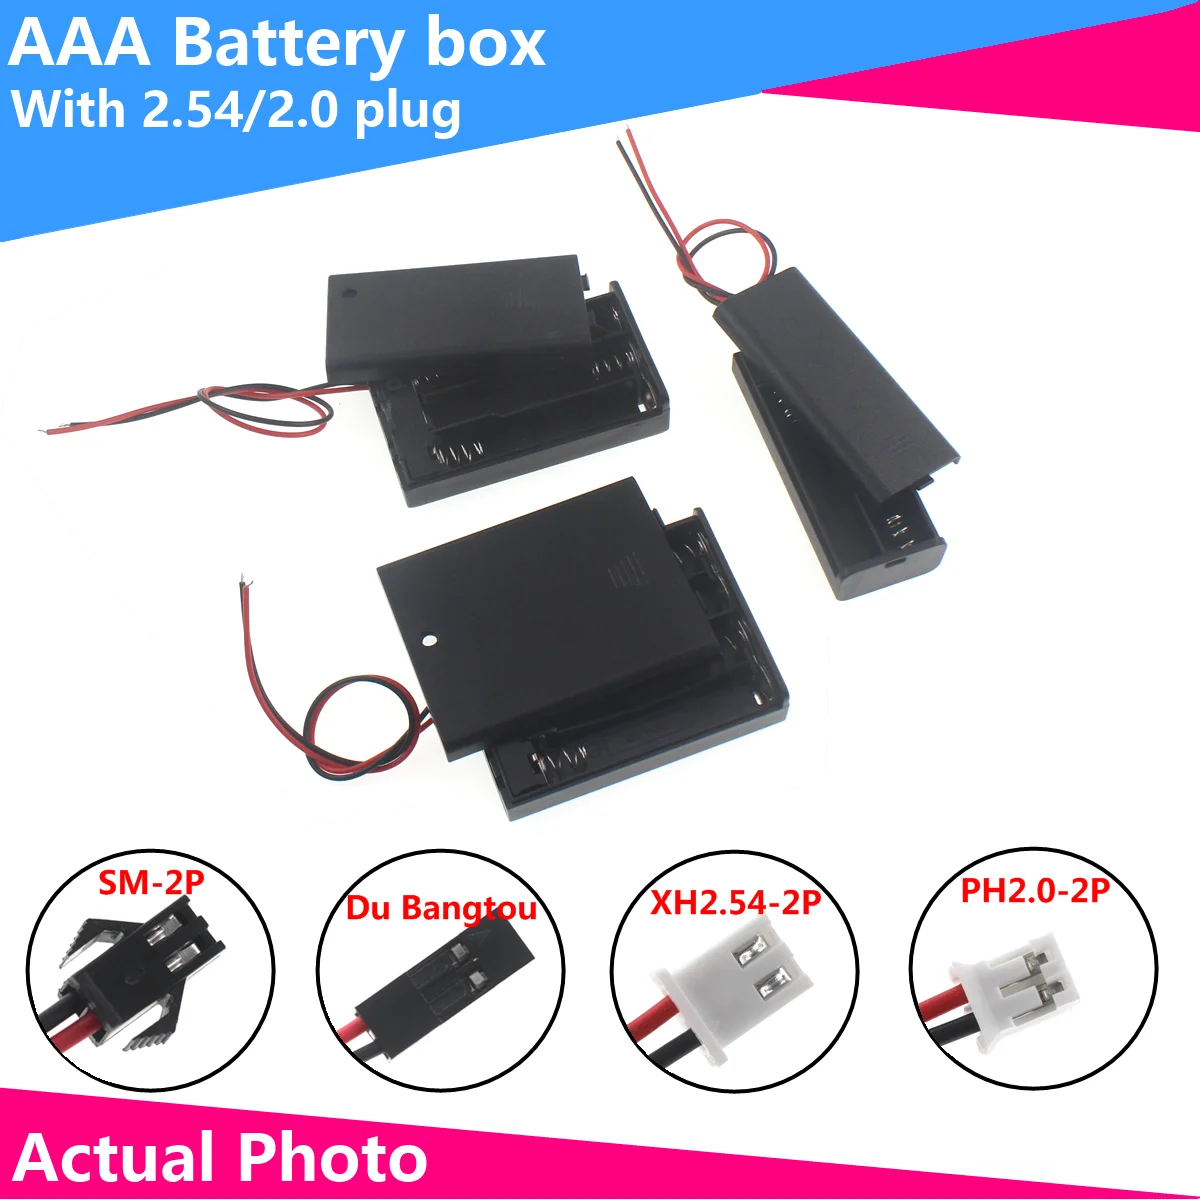 

1pcs 1x 2x 3x 4x AAA Battery Box Case Holder With Wire Leads ABS Plastic Battery Box Connecting Solder For 1-4pcs AAA Batteries